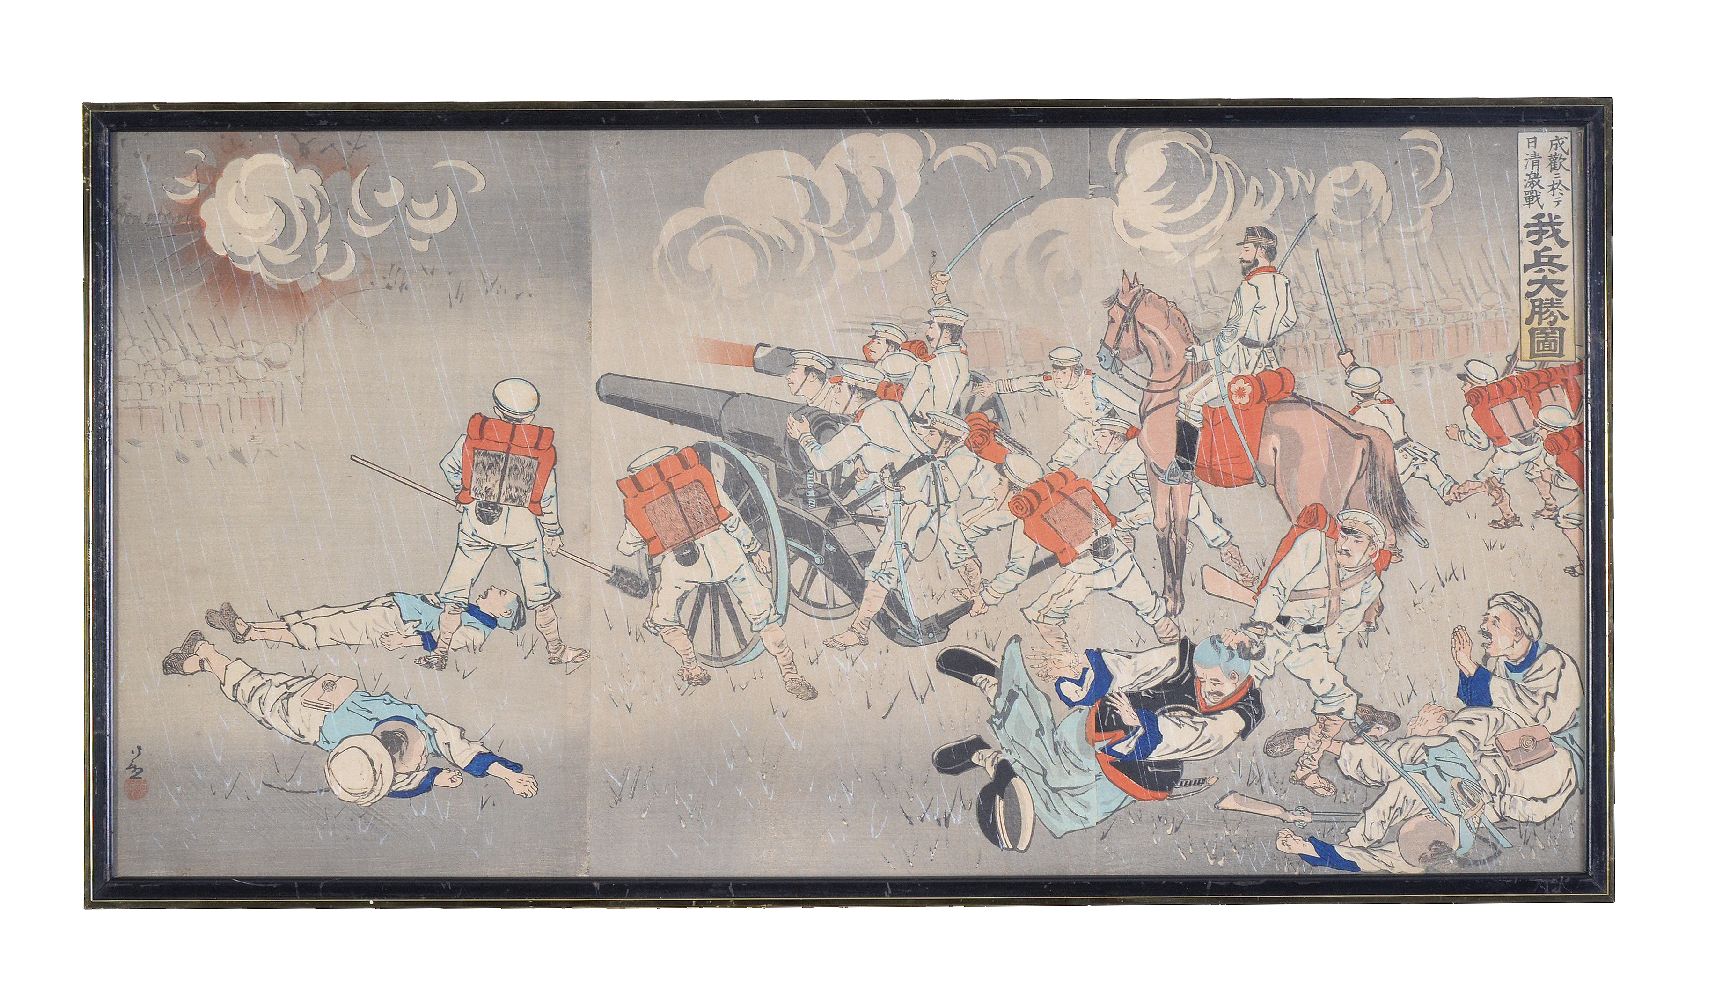 Watanabe Nobukazu: A woodblock printed triptych depicting a battle scene from the First () Sino-